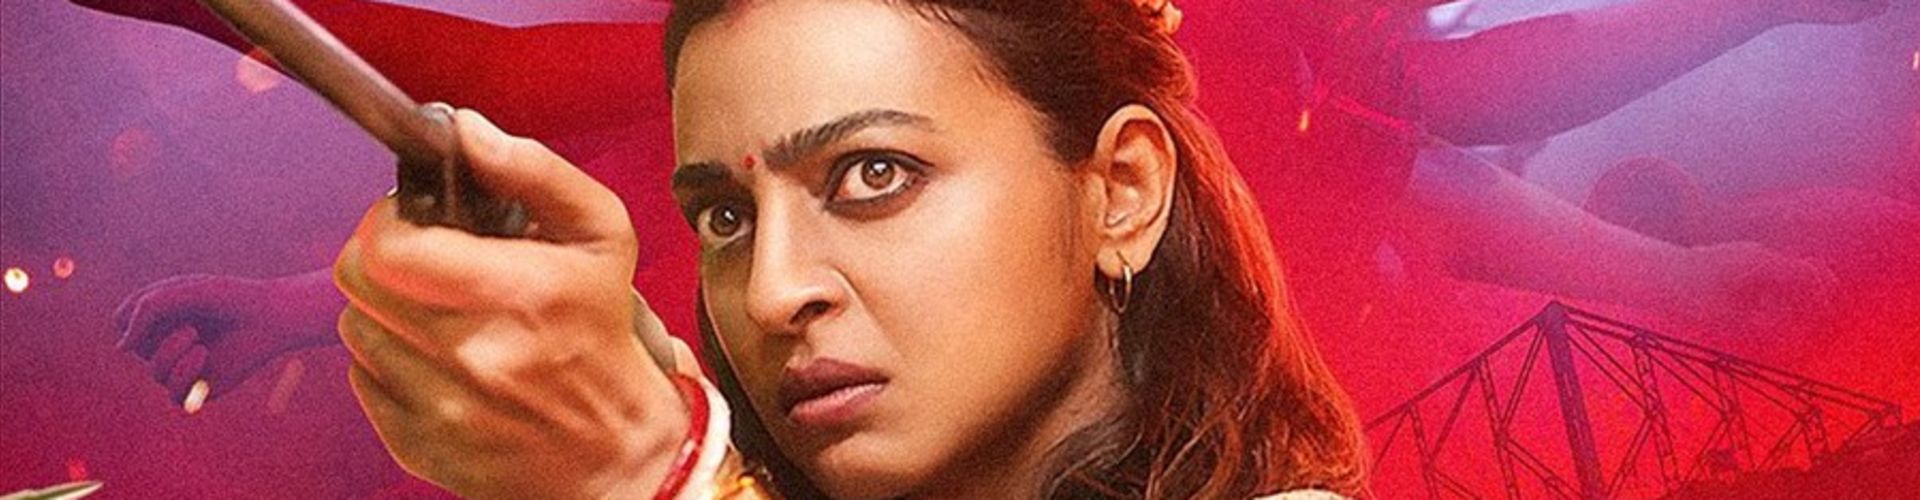 Mrs Undercover First Look Out, Starring Radhika Apte